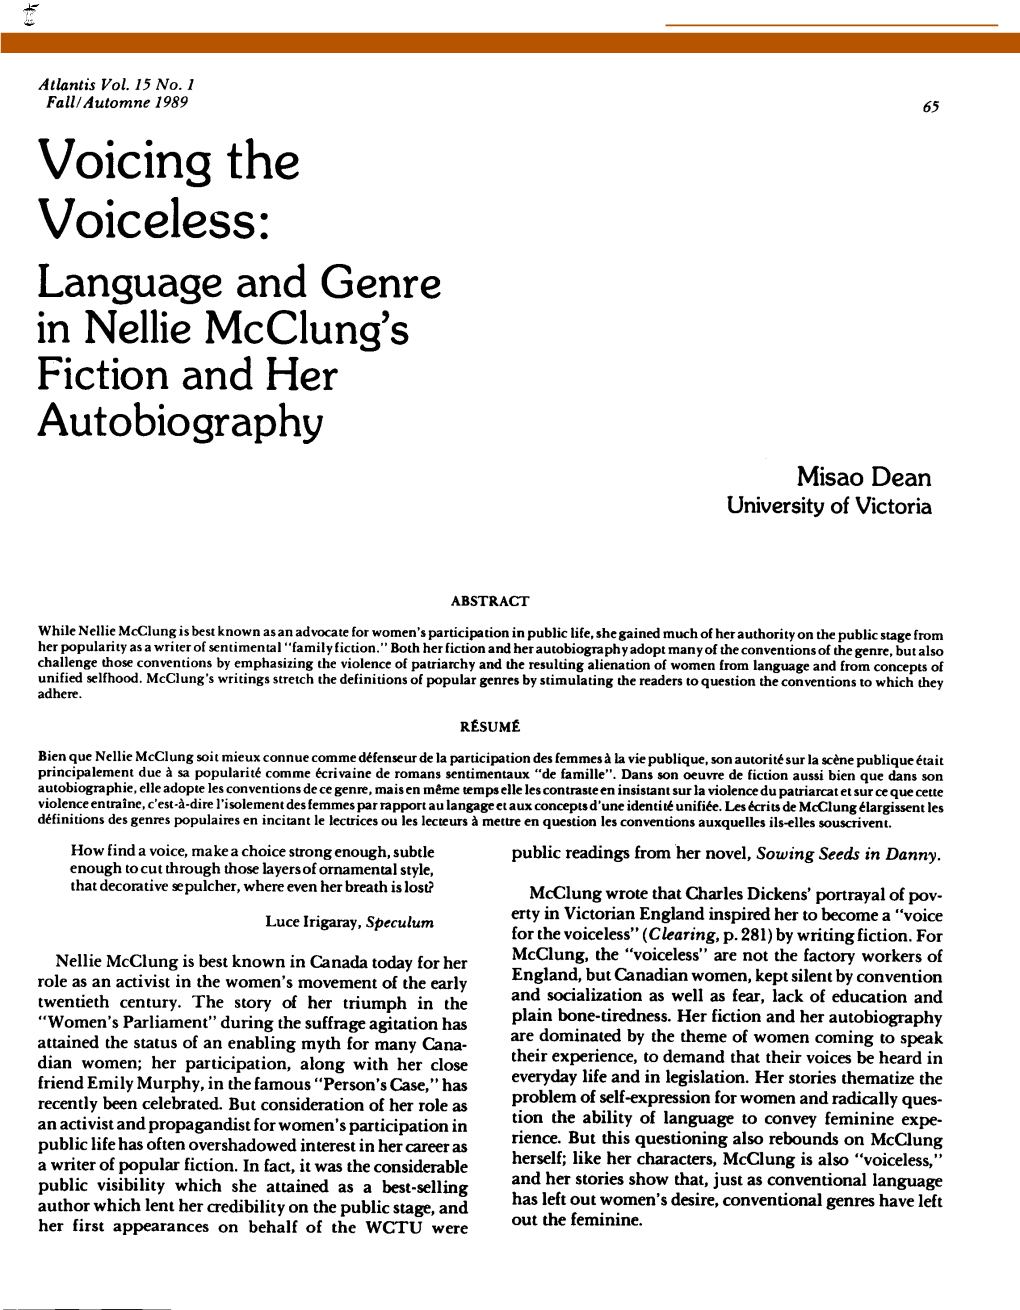 Voicing the Voiceless: Language and Genre in Nellie Mcclung's Fiction and Her Autobiography Misao Dean University of Victoria